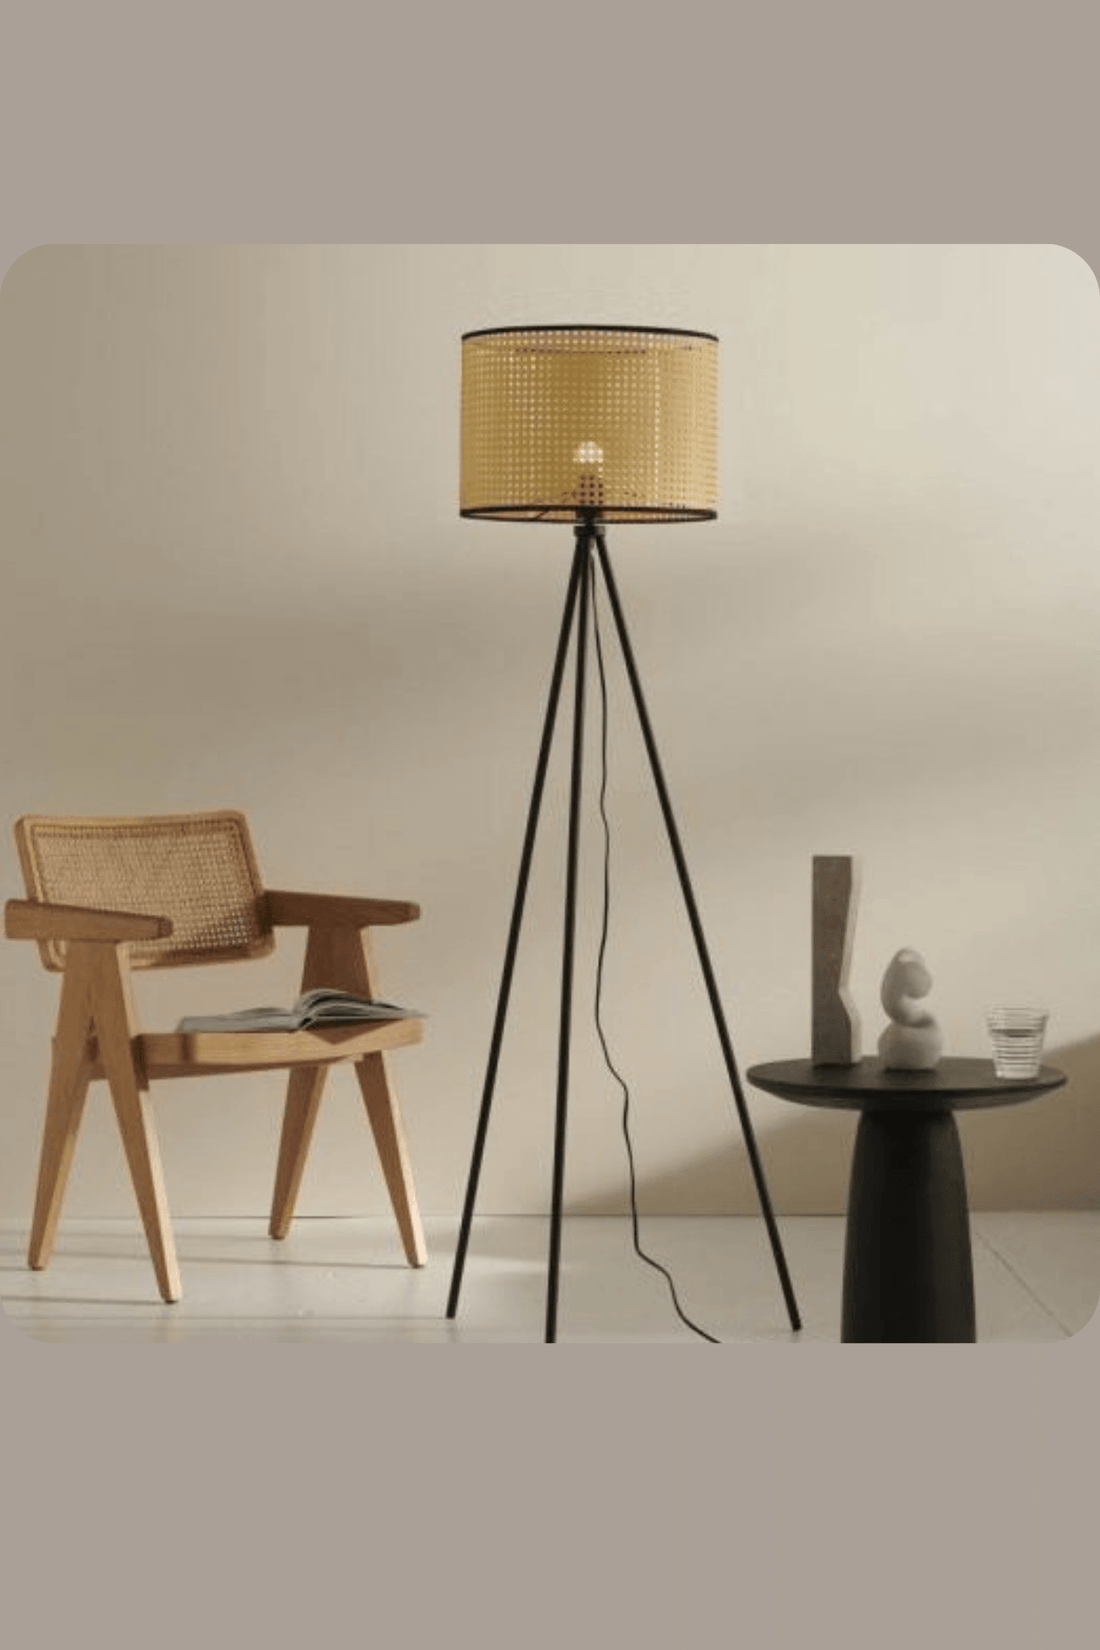 Cytric Handcrafted Floor Lamp by The Light Library